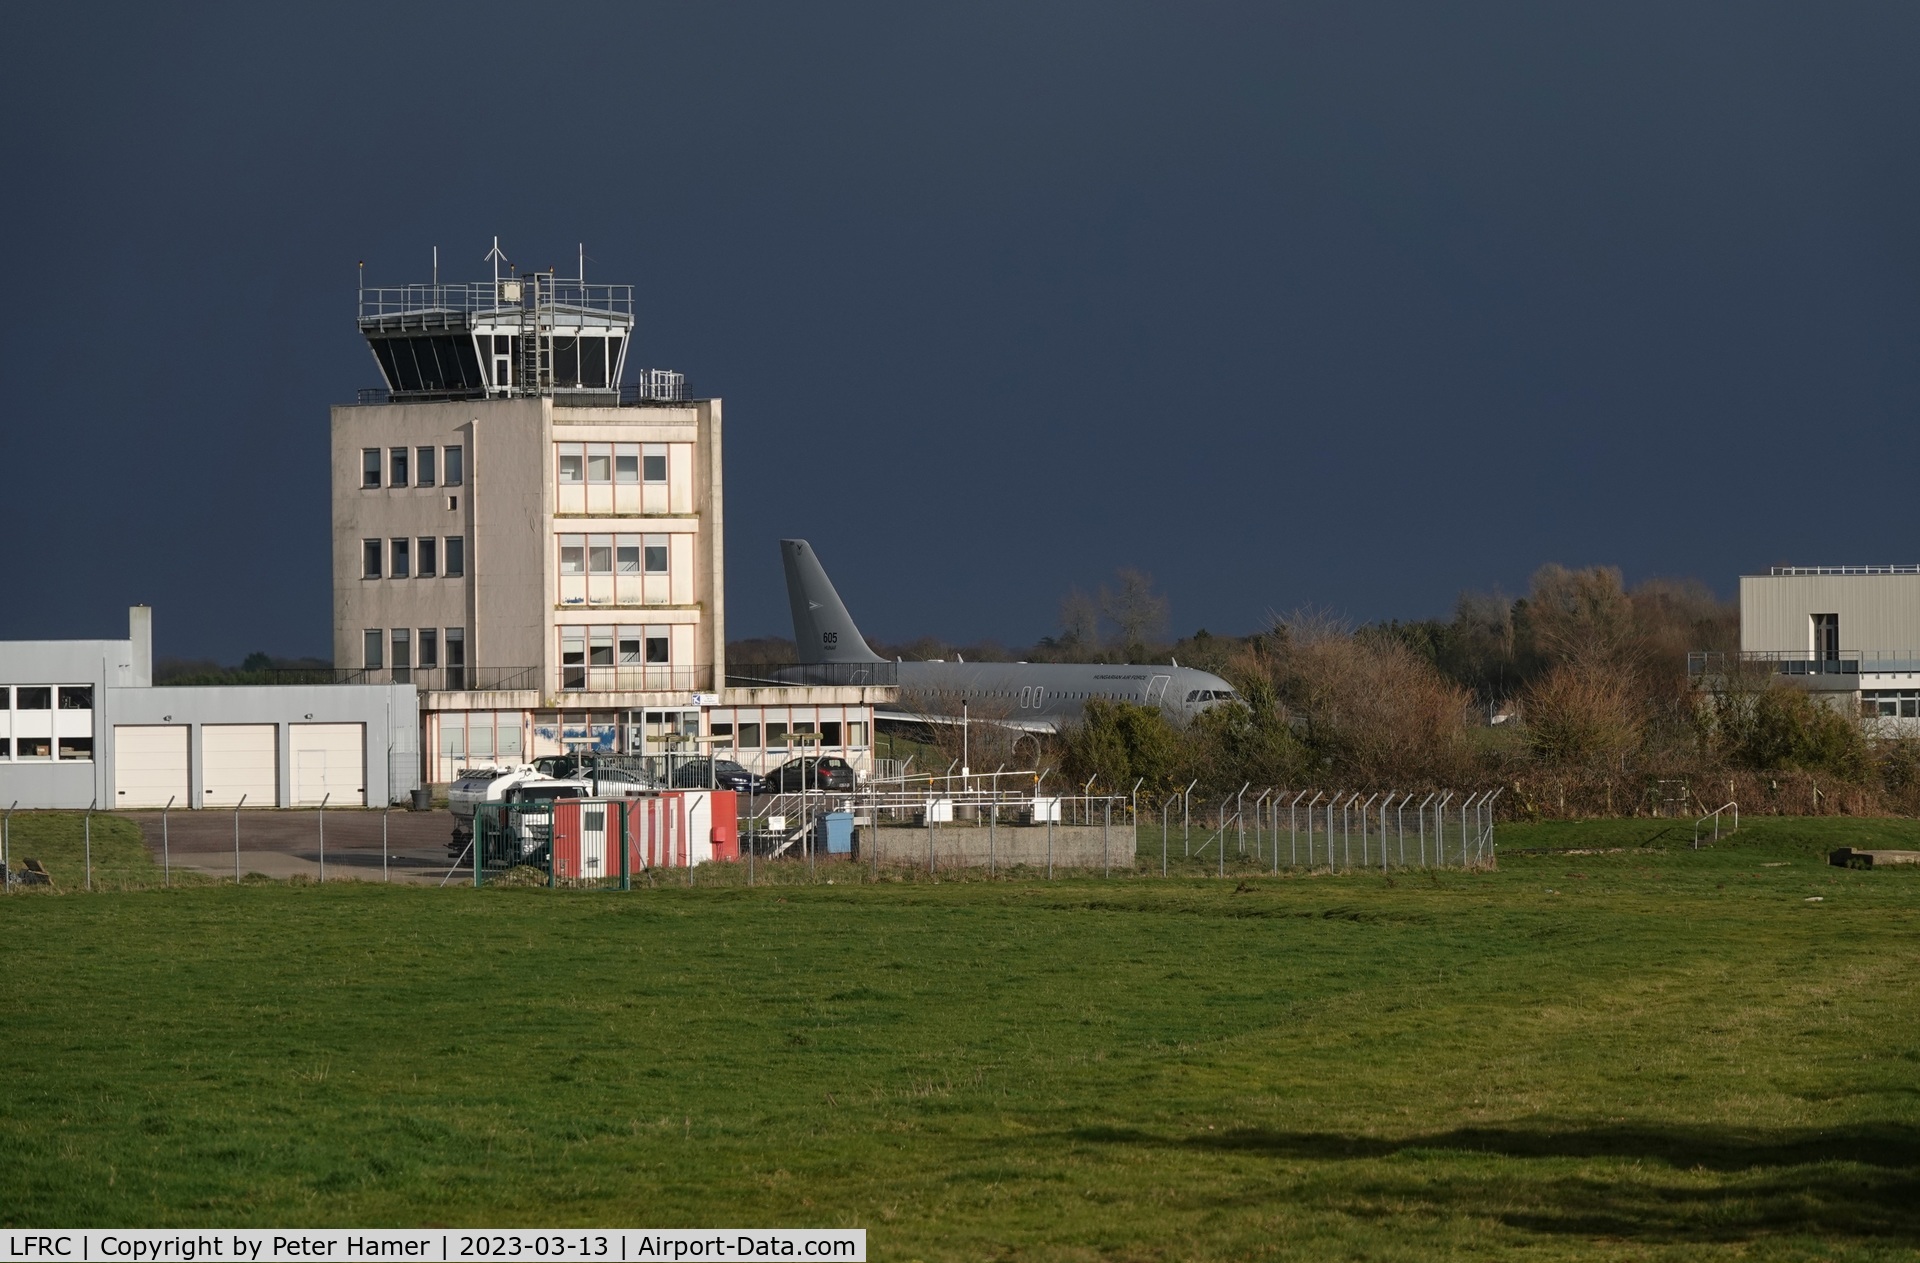 Cherbourg Maupertus Airport, Cherbourg France (LFRC) - Cherbourg